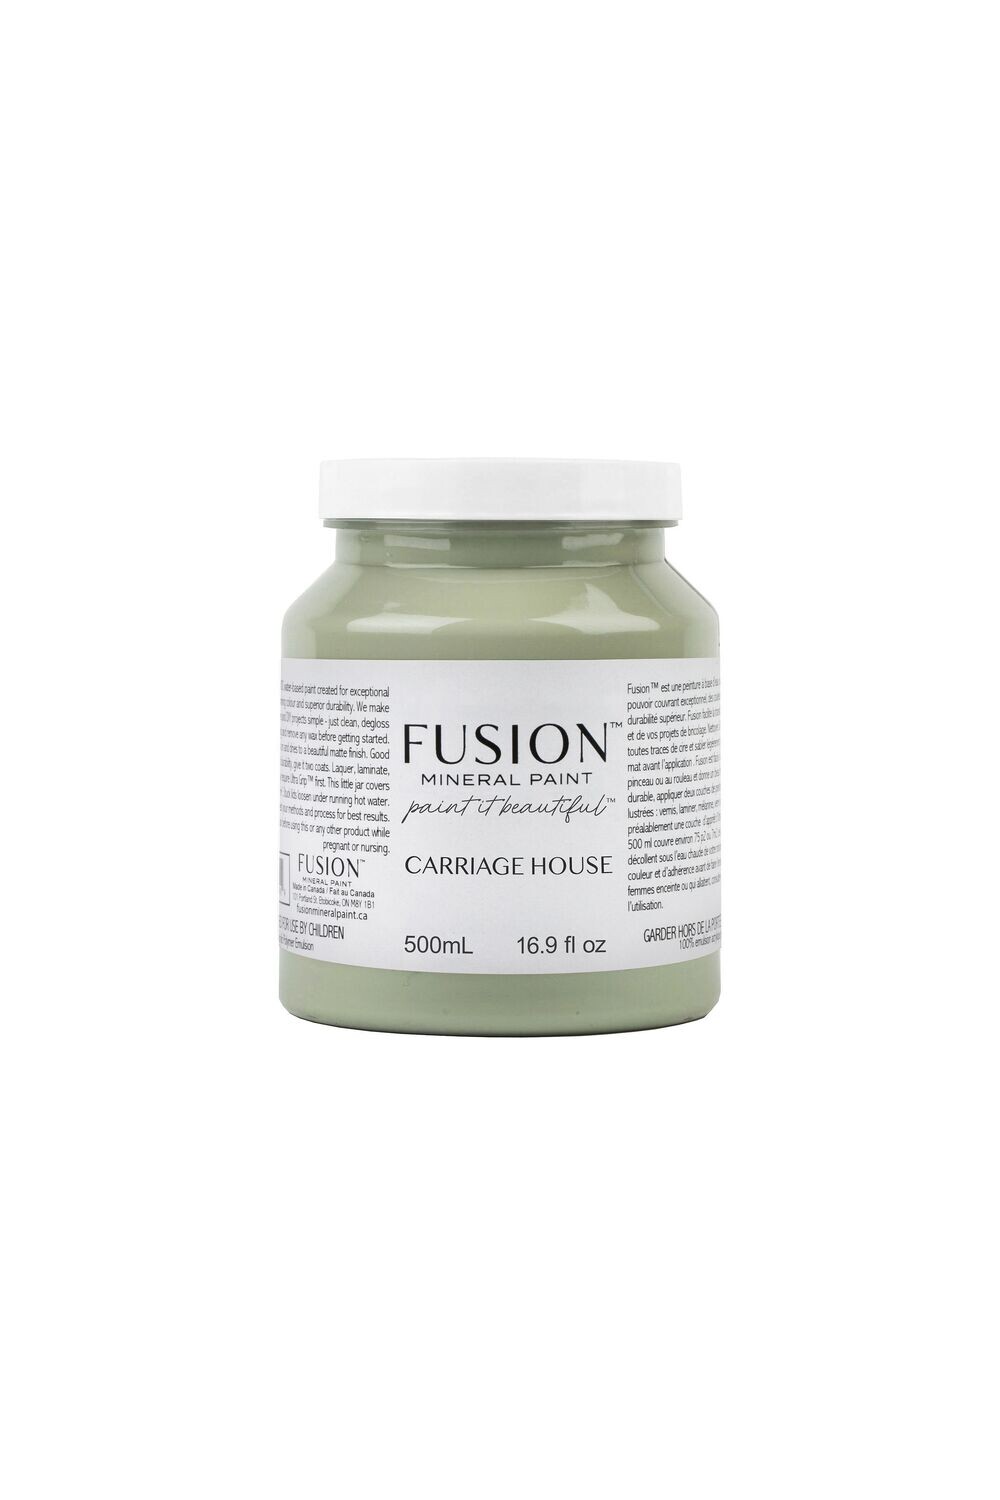 Fusion Carriage House 500ml